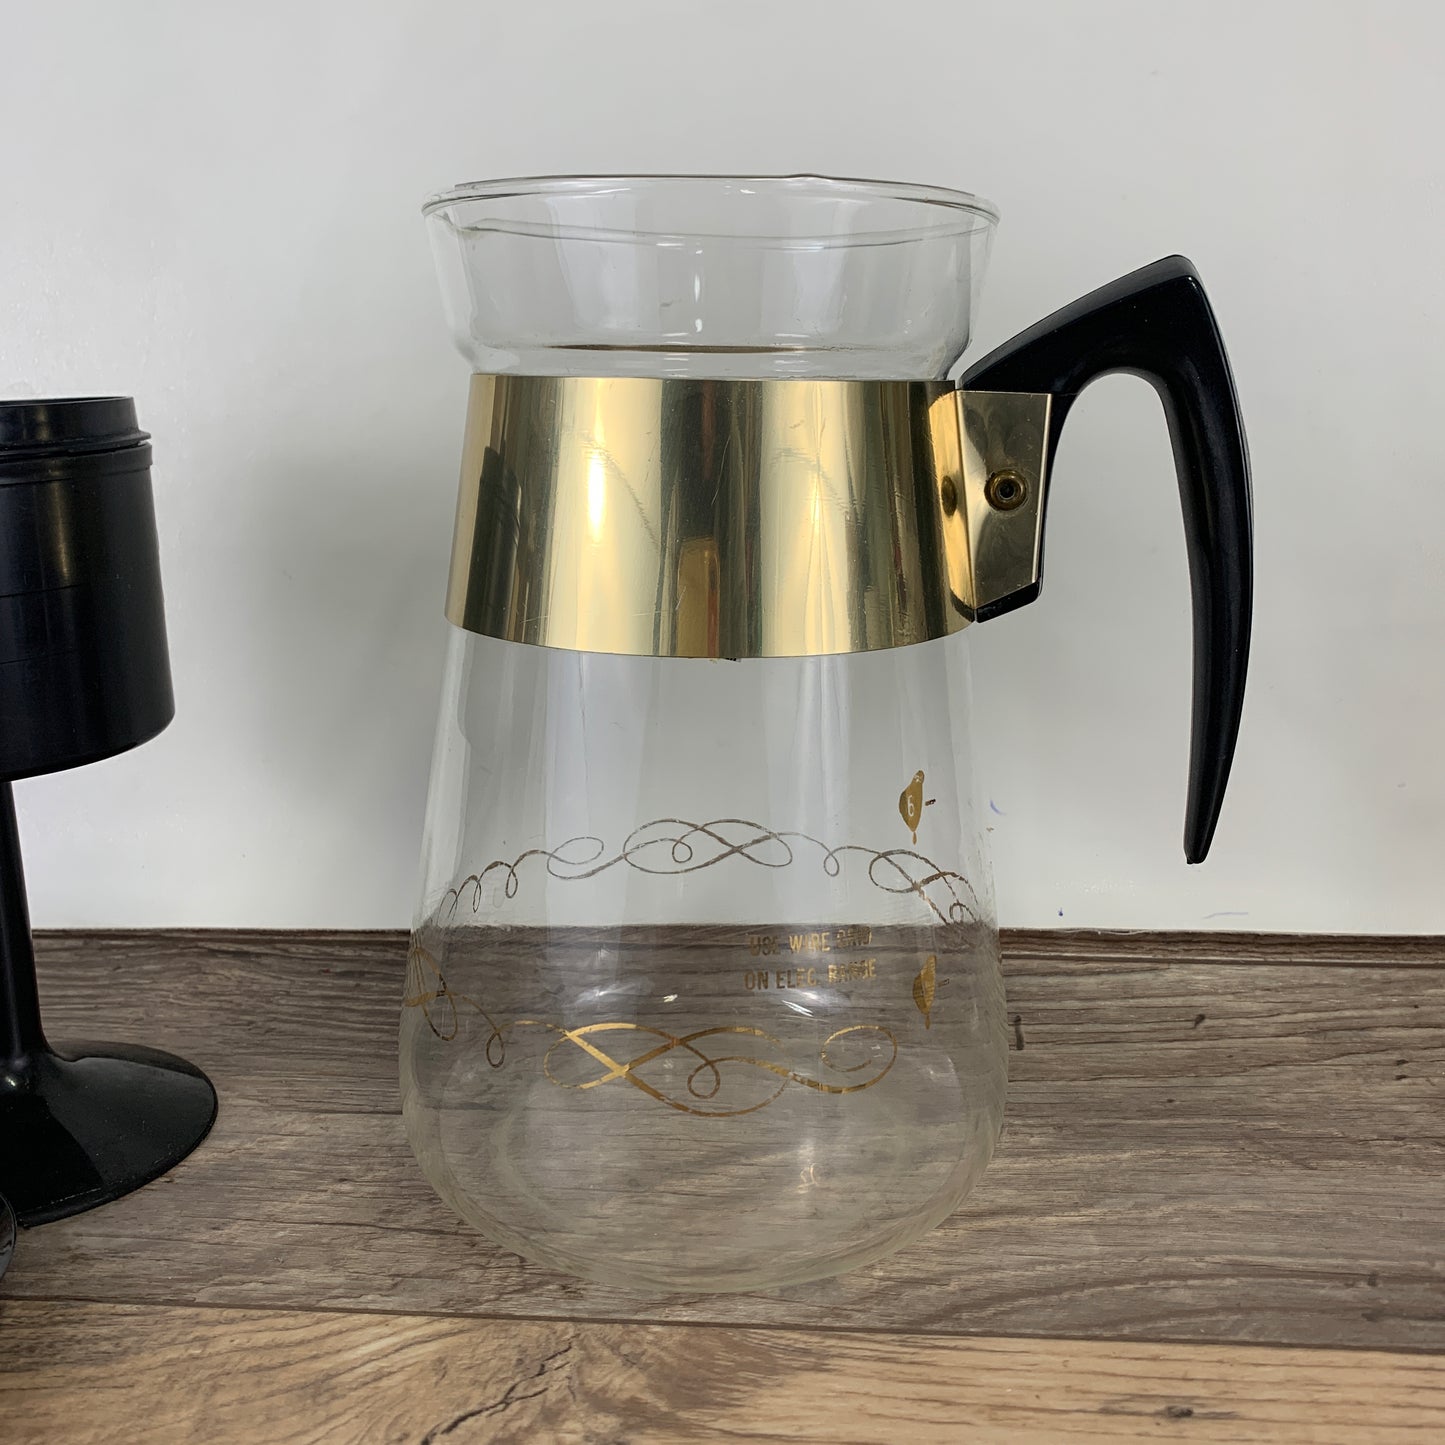 Glass Coffee Percolator with Plastic Insert Black and Gold Vintage Coffee Maker